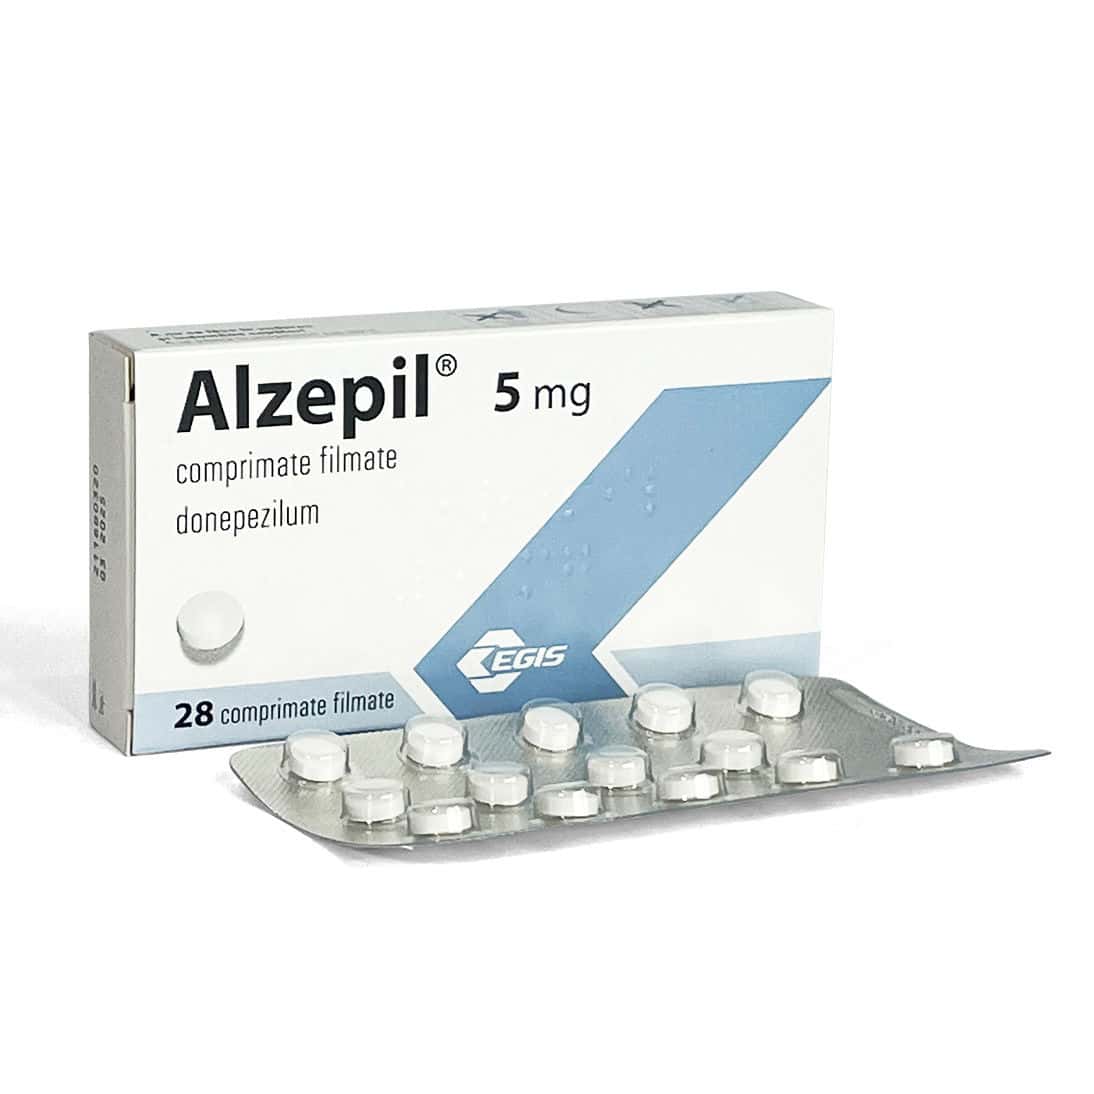 Alzepil 5mg comprimate film N14x2